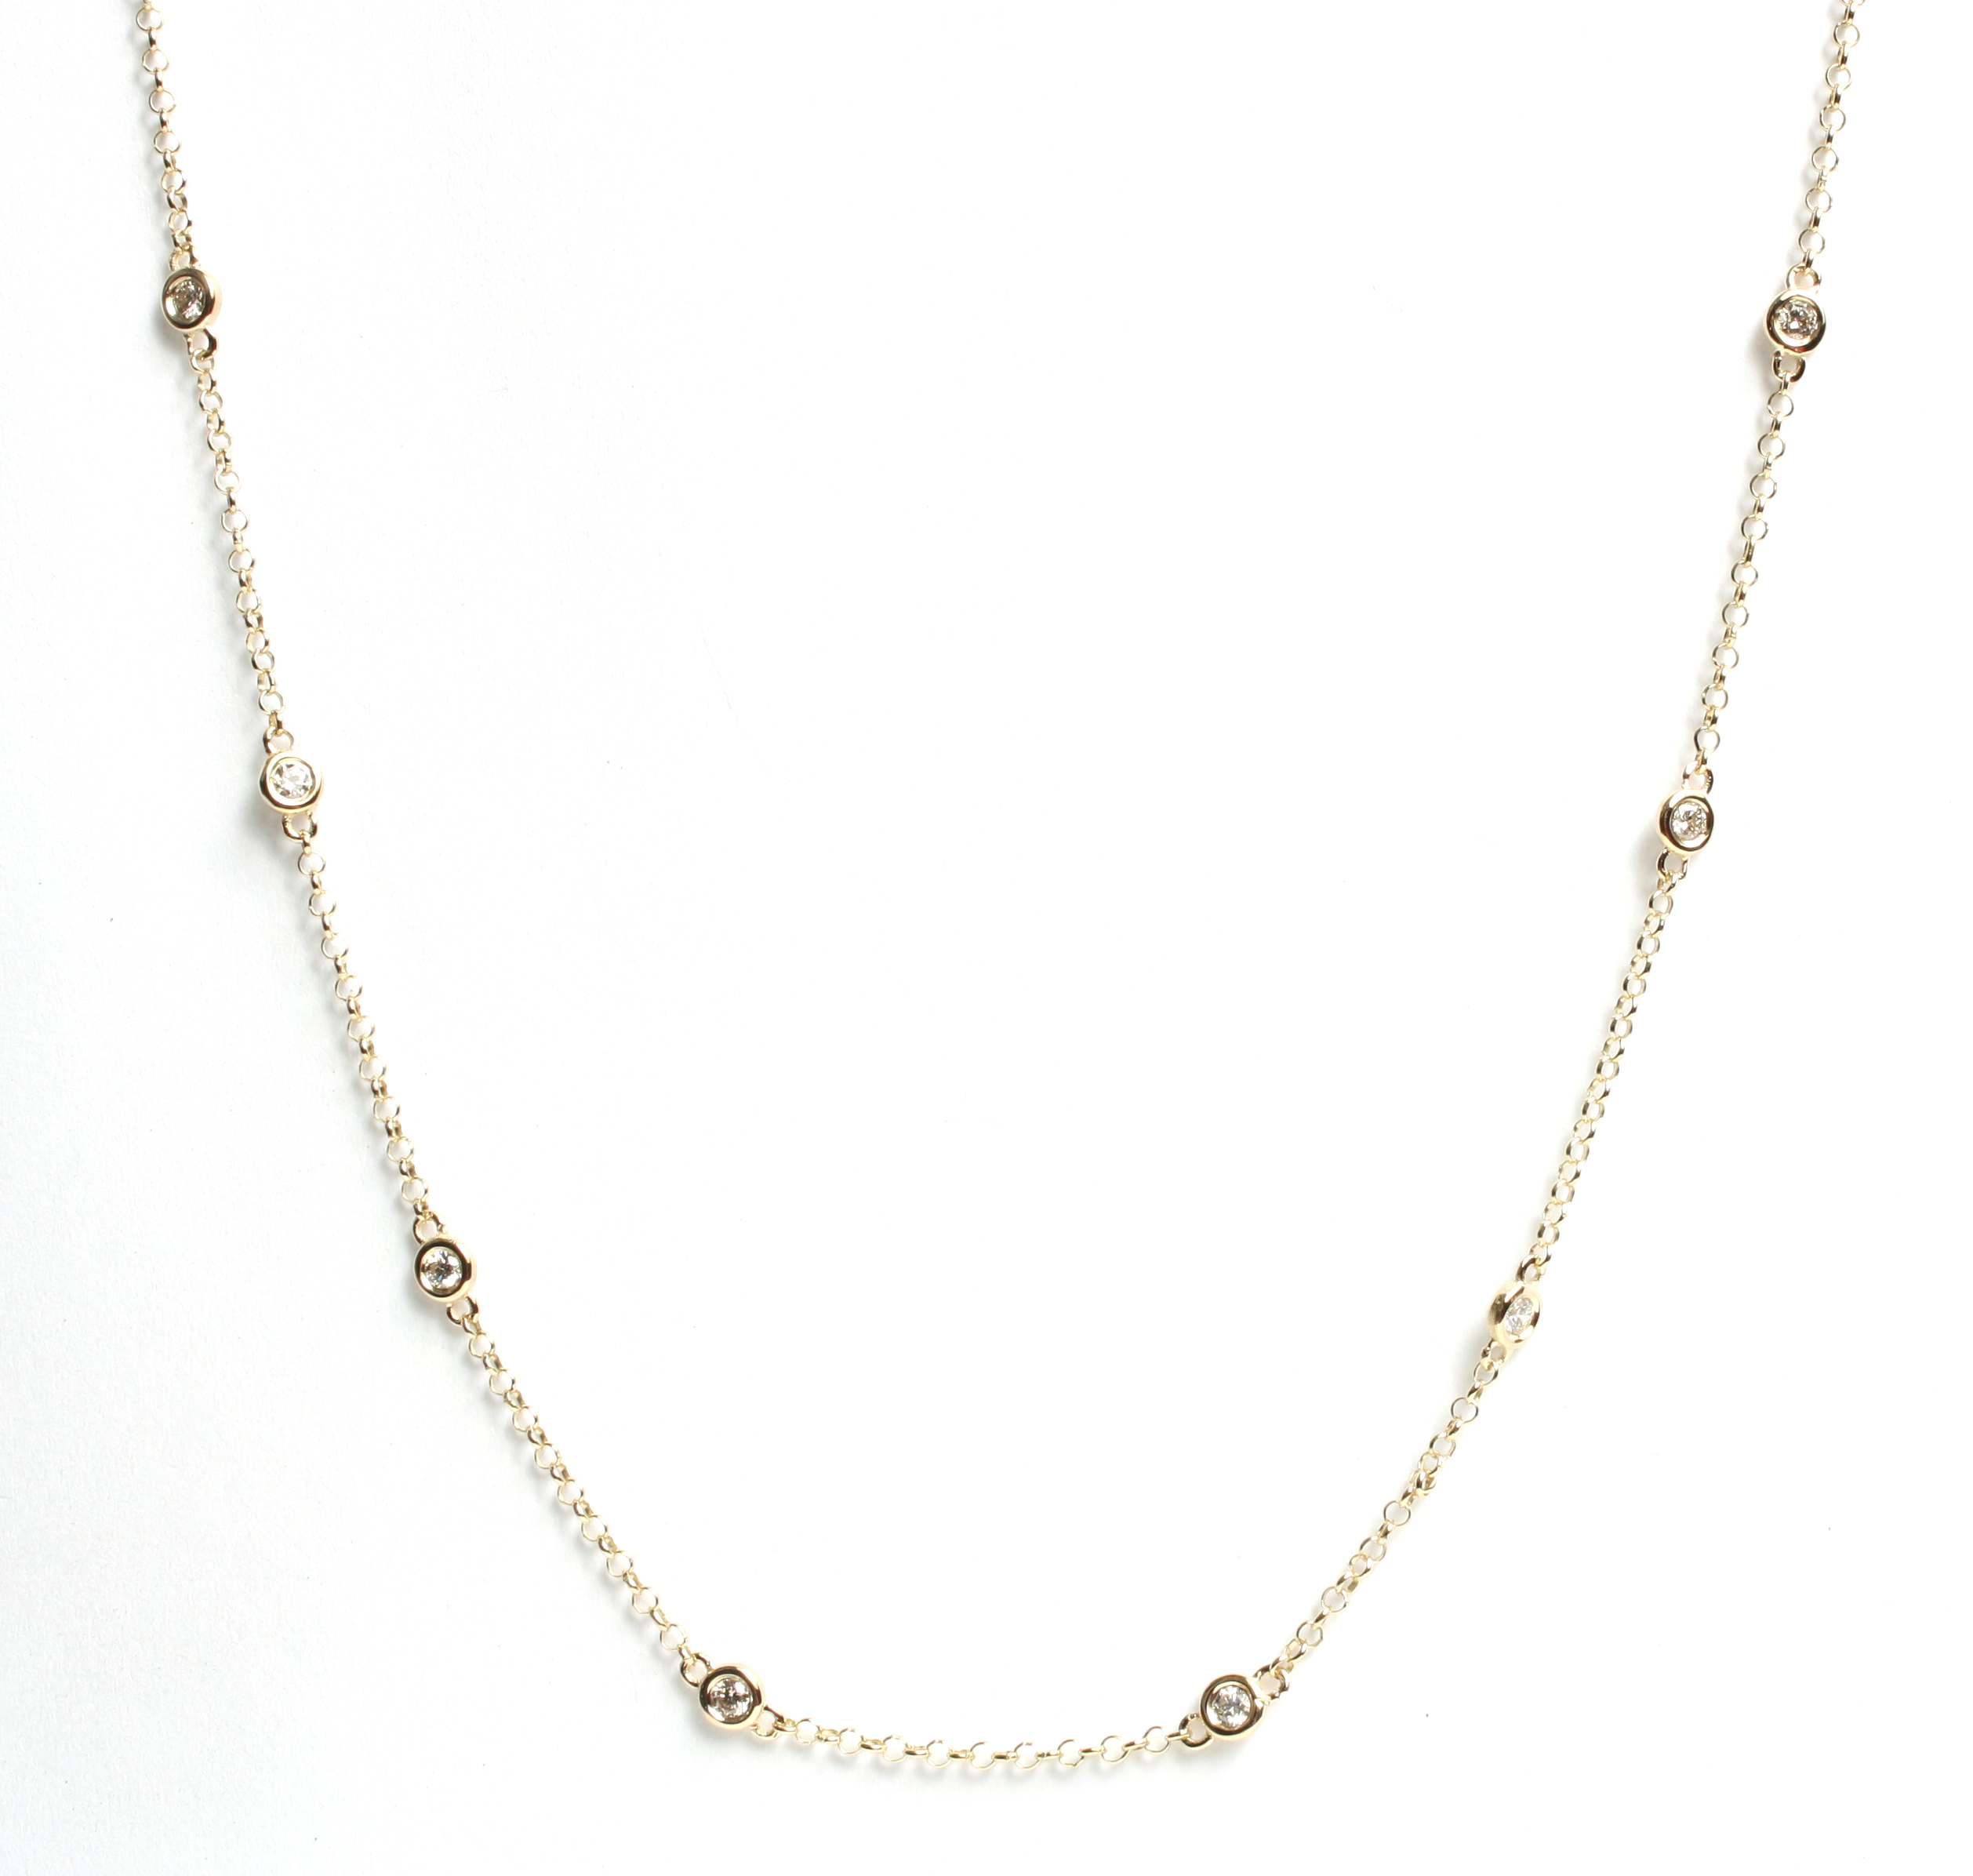 Diamond Station Necklace 14K Yellow Gold and White Gold 18